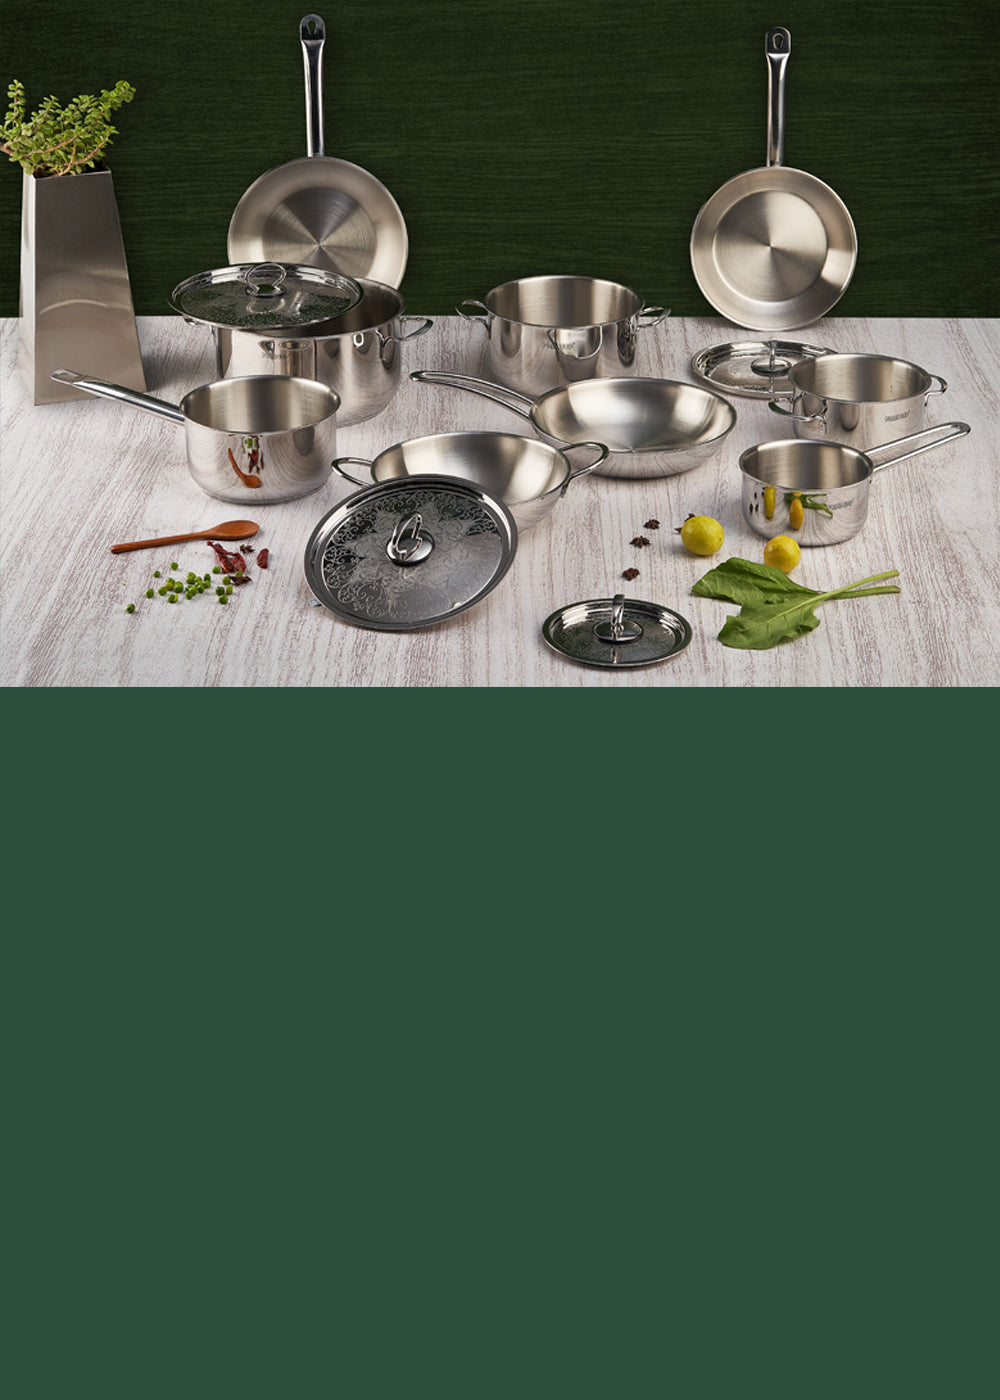 Buy Kitchenware Products Online